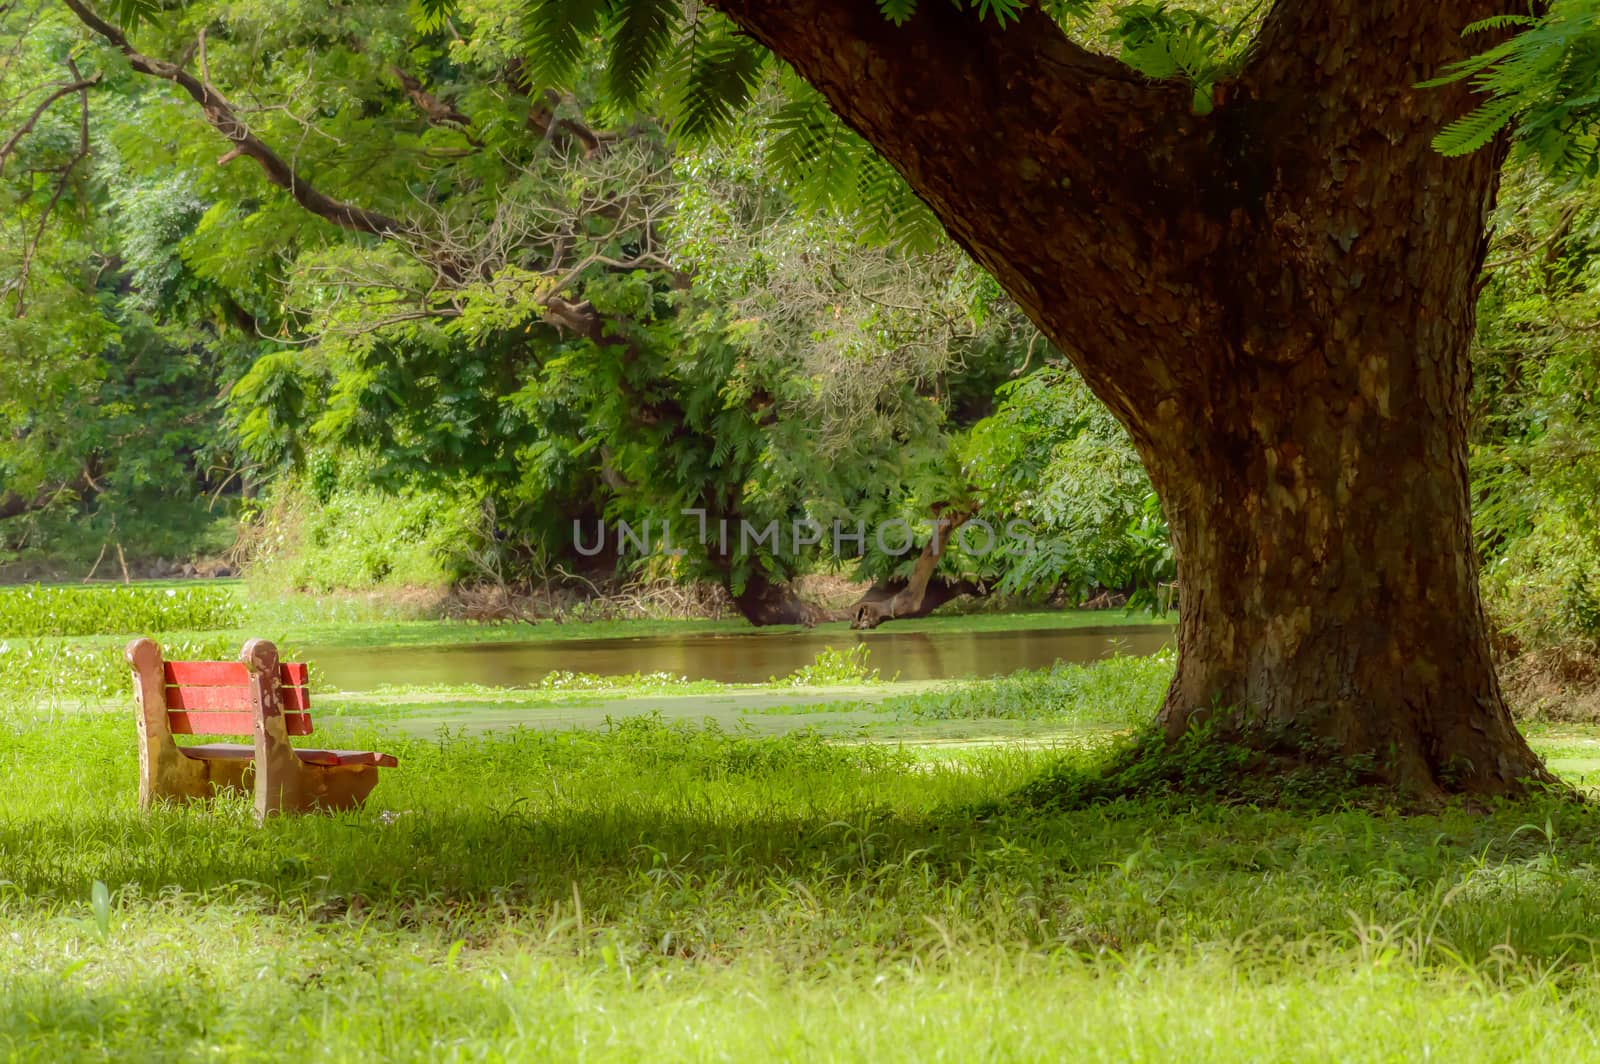 Red color bench in the autumn park. ( Kolkata, India ) by sudiptabhowmick